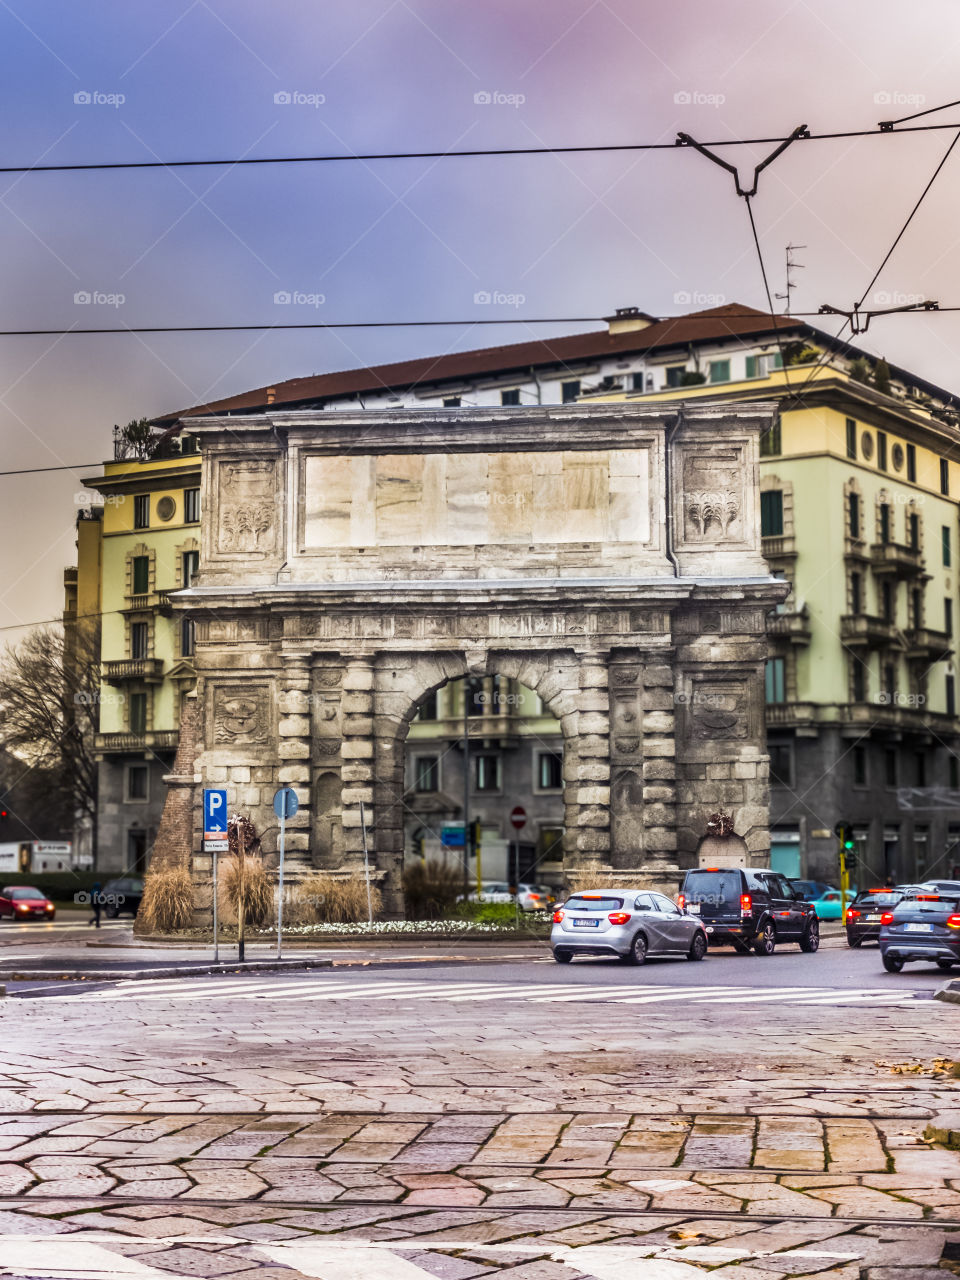 Porta Romana, was the first and the main imperial entrance of the entire city of Milan, as it was the starting point of the road leading to Ancient Rome. Milan, Lombardy, Italy.